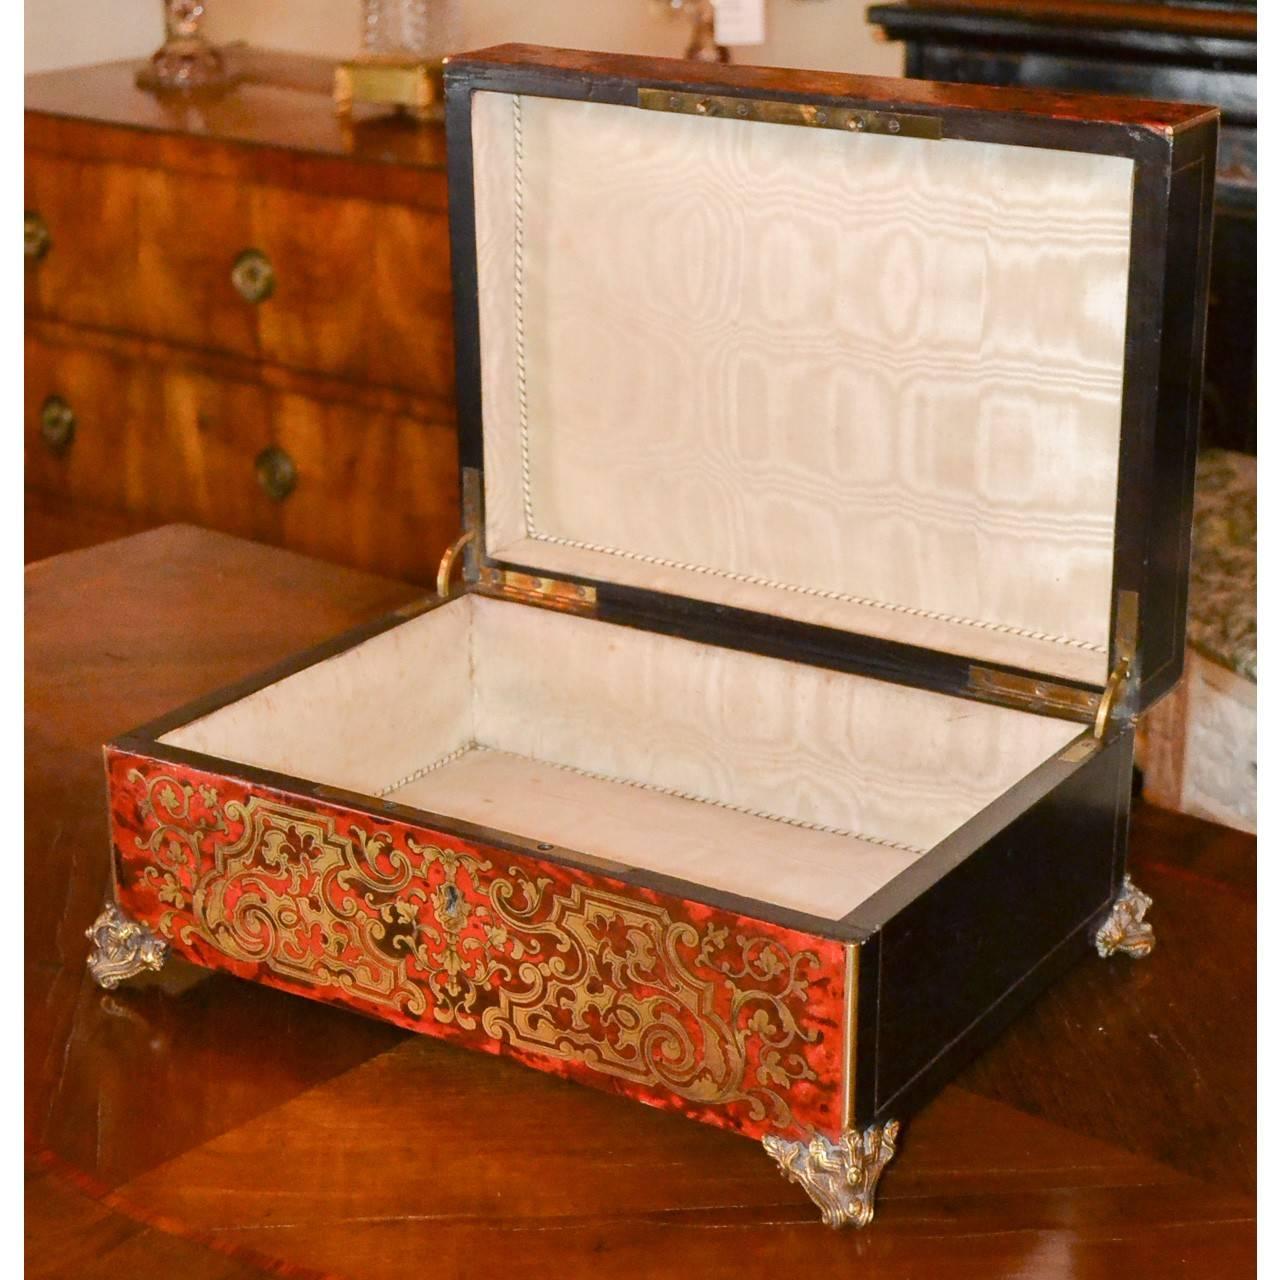 Fine and delicate brass inlay in this one of a kind Boulle style box made in France, circa 1880.
Wonderful box for special letters, jewelry, gloves, or whatever is important to you.
This would make a smashing gift.
Measures: 13.5 inches wide x 10